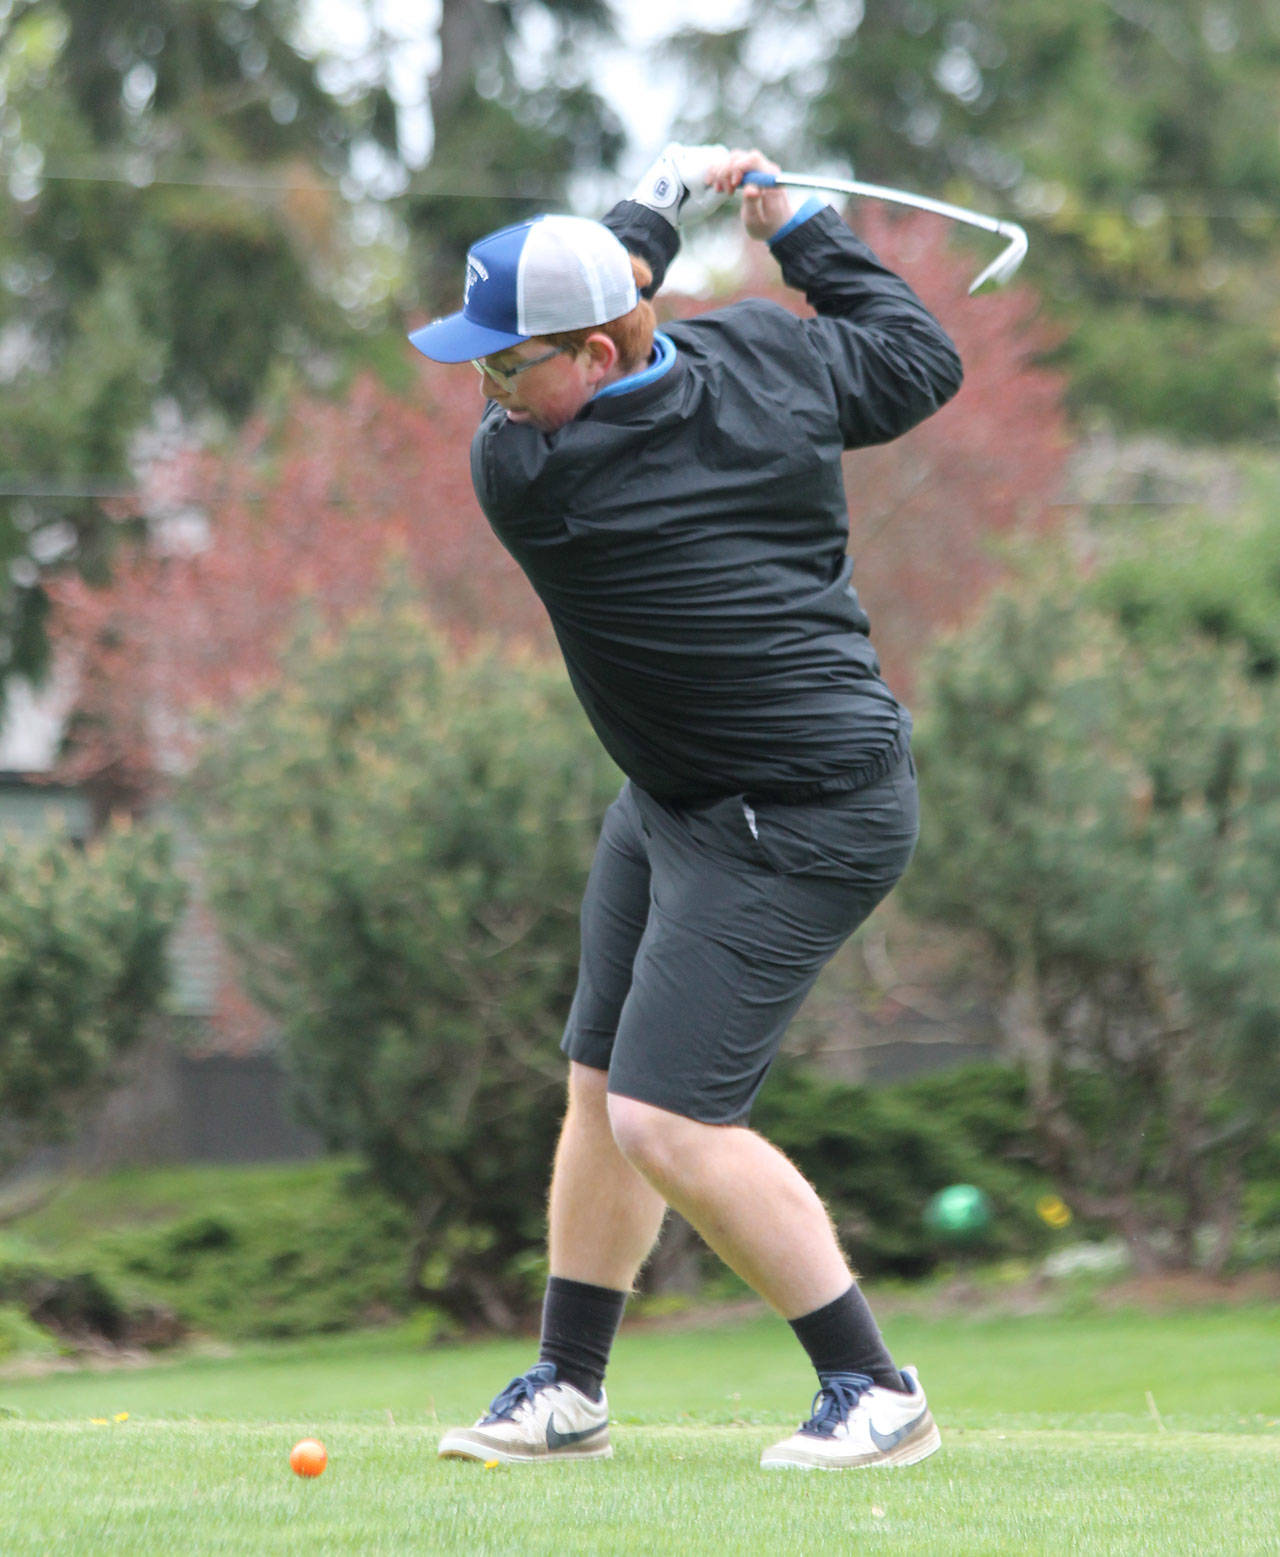 Brent de Wolfe loads up to tee off. (Photo by Jim Waller/South Whidbey Record)